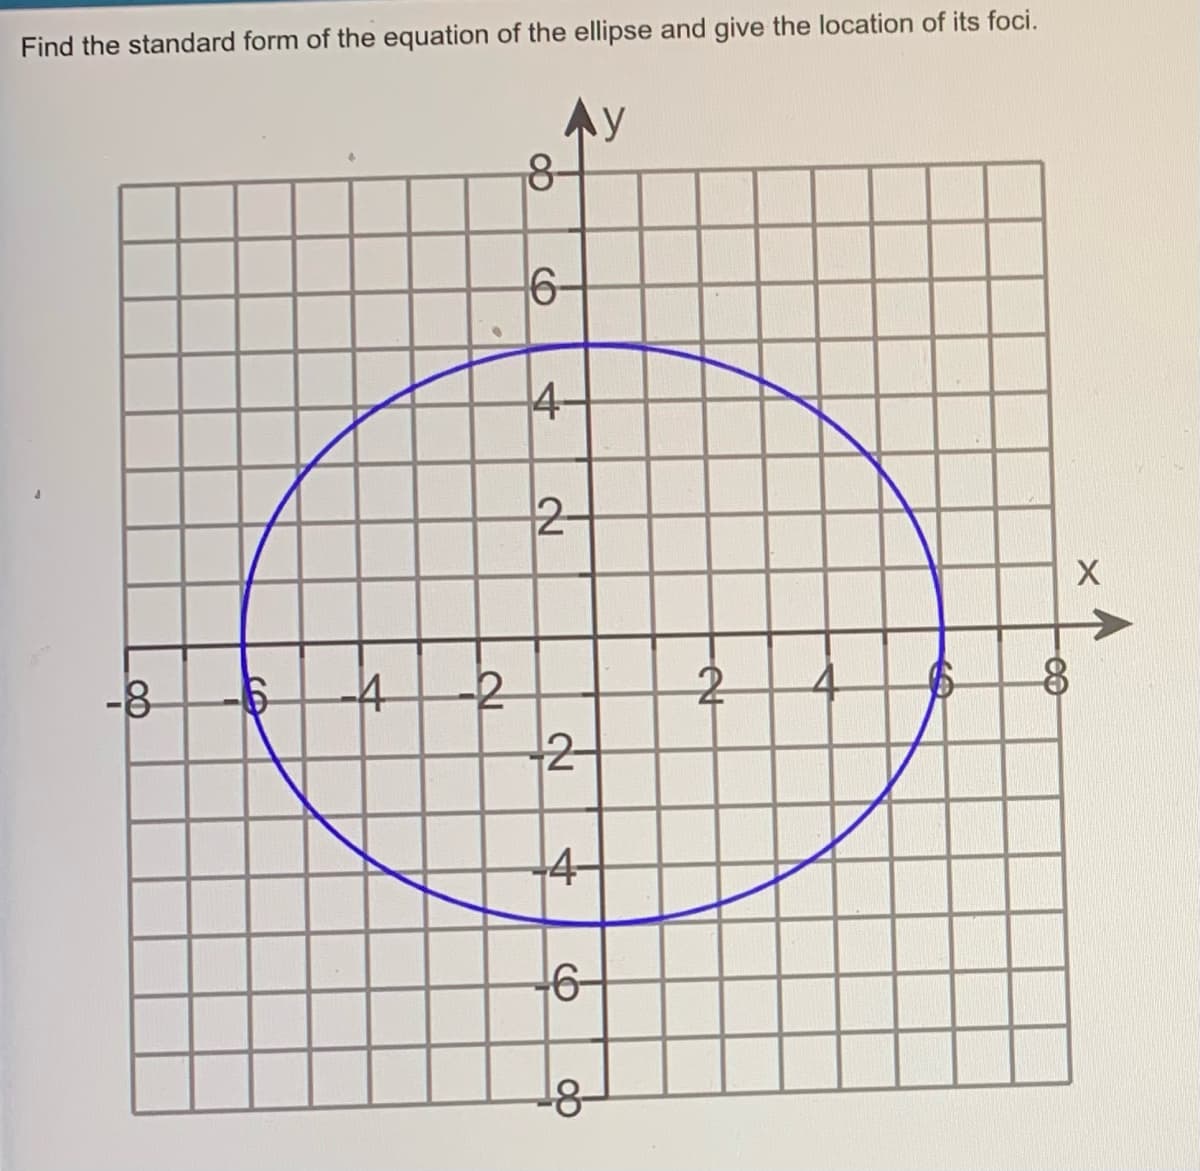 Find the standard form of the equation of the ellipse and give the location of its foci.
y
18-
6-
4
2-
-8
-4
2-
-4
2
